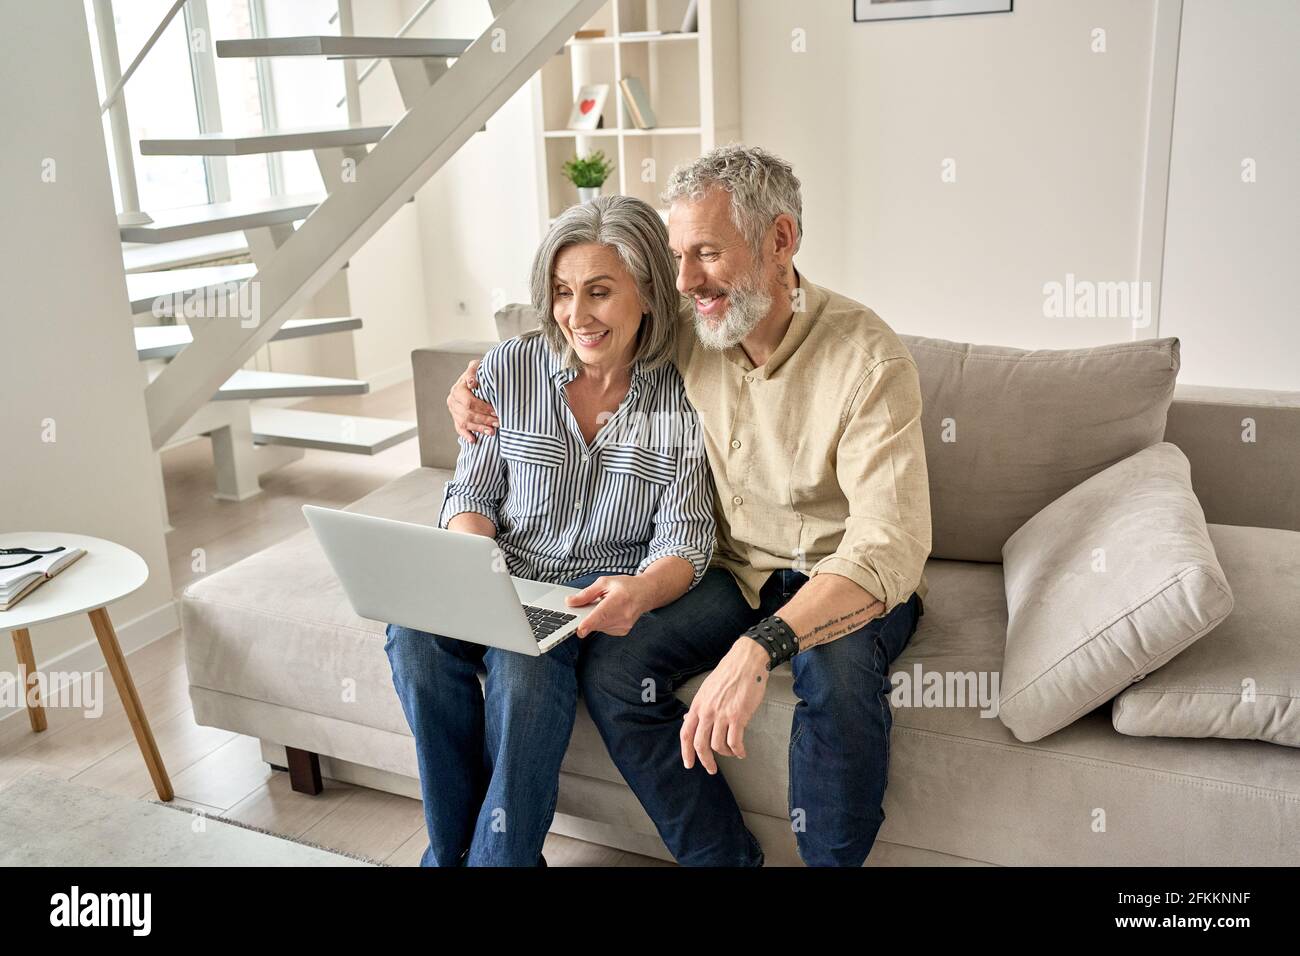 Happy old mid age family couple using laptop computer sitting on couch. Stock Photo